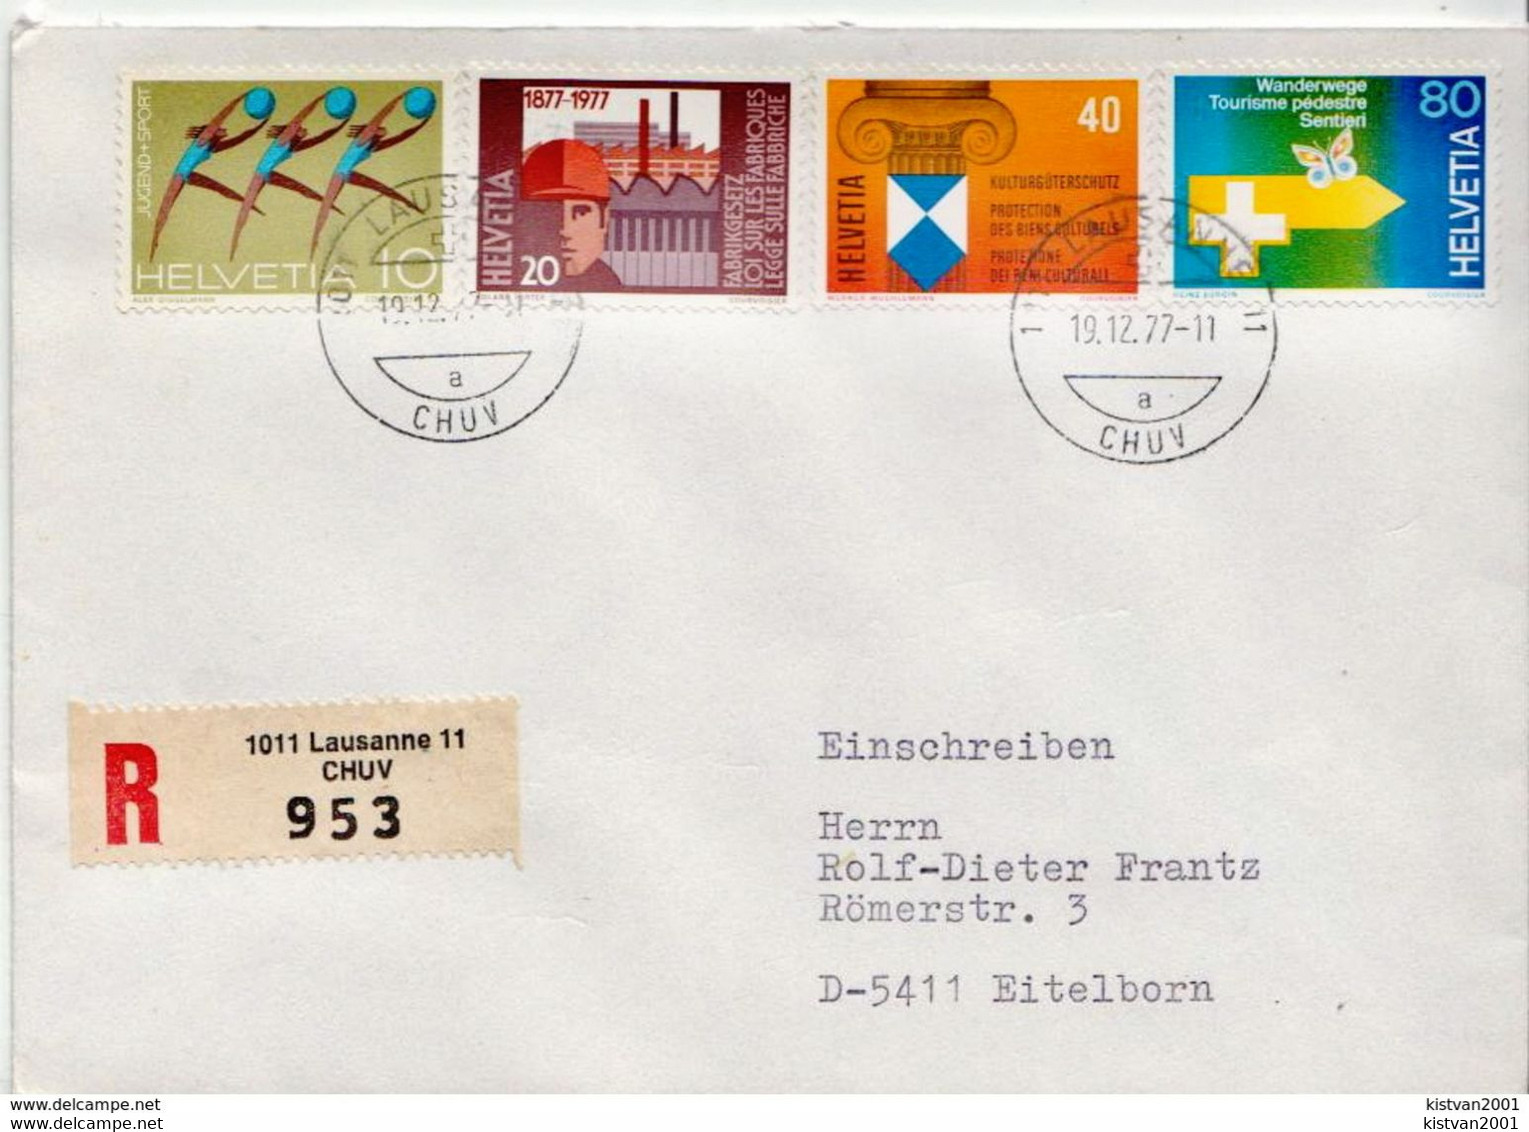 Postal history: Switzerland registered cover with Geneve Salon de l'Auto cancel 1988 and 18 more covers